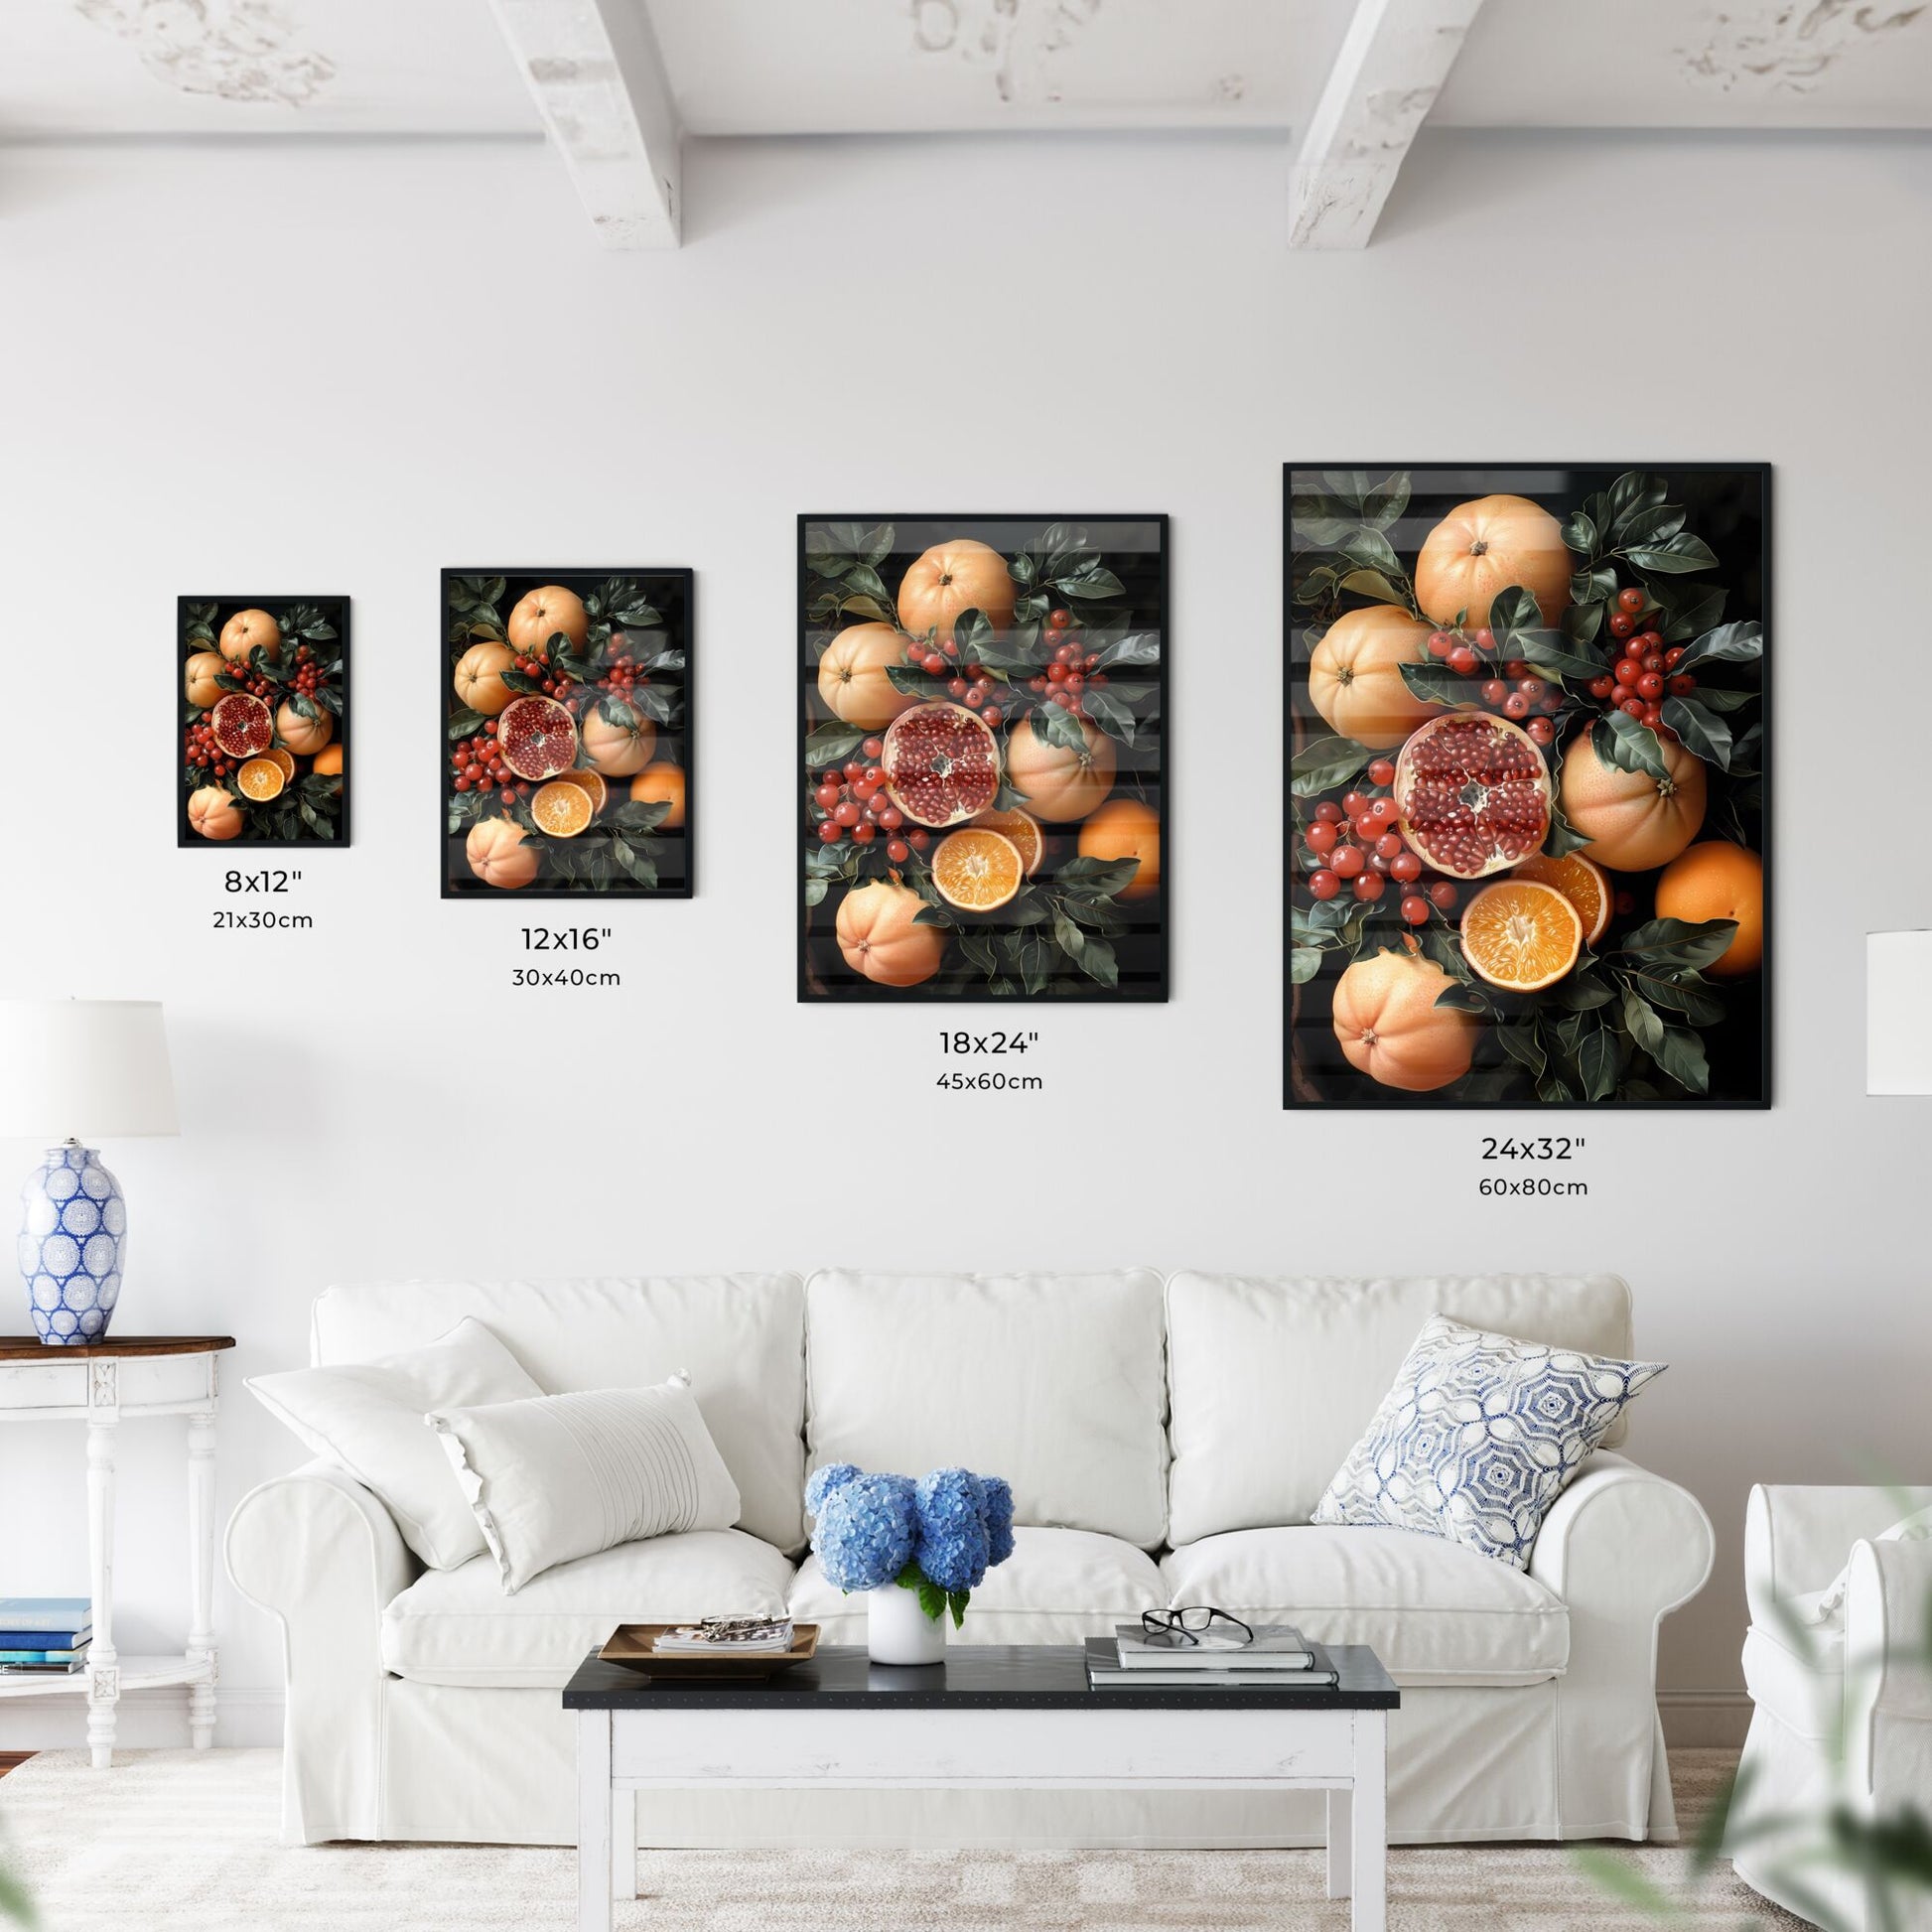 Vibrant Contemporary Still Life Painting of Oranges and Pomegranates with Focus on Art Default Title